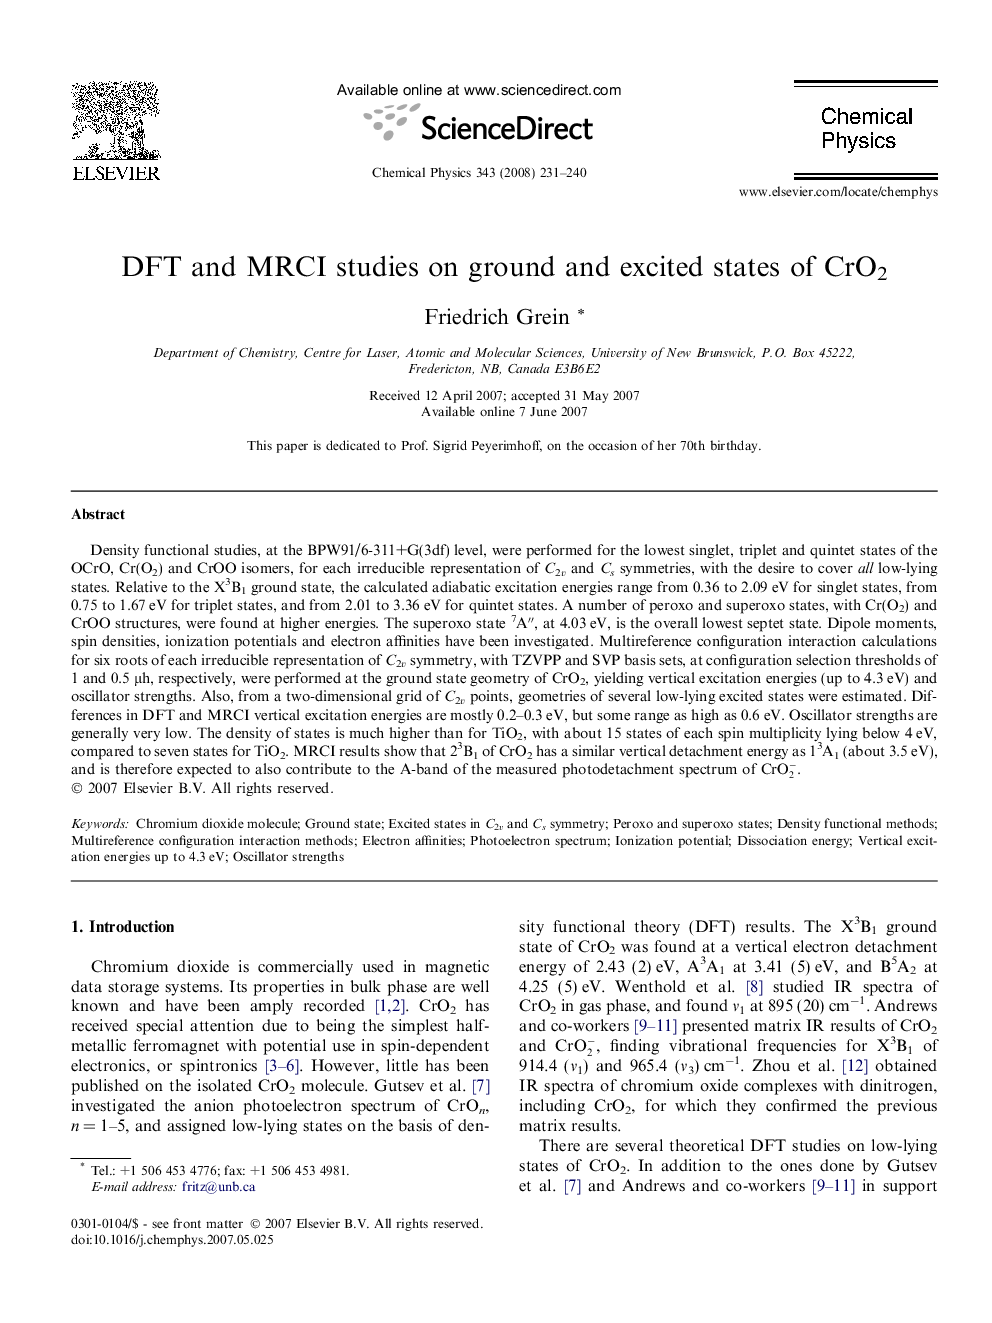 DFT and MRCI studies on ground and excited states of CrO2